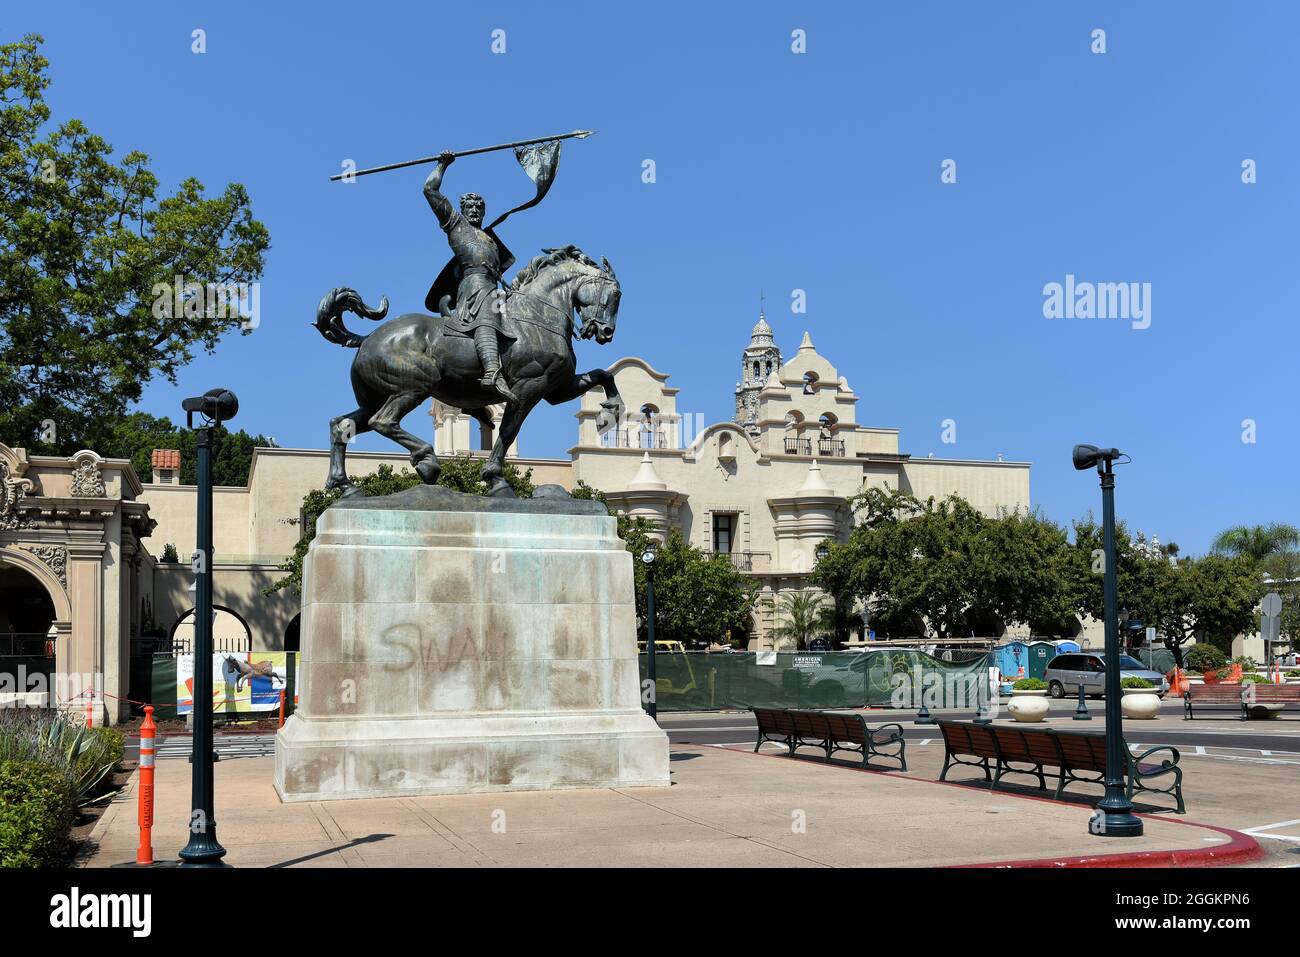 SAN DIEGO, CALIFORNIA - 25 AUG 2021: El Cid Statue in Balboa Park, with the Mingei International Museum in the background. Stock Photo